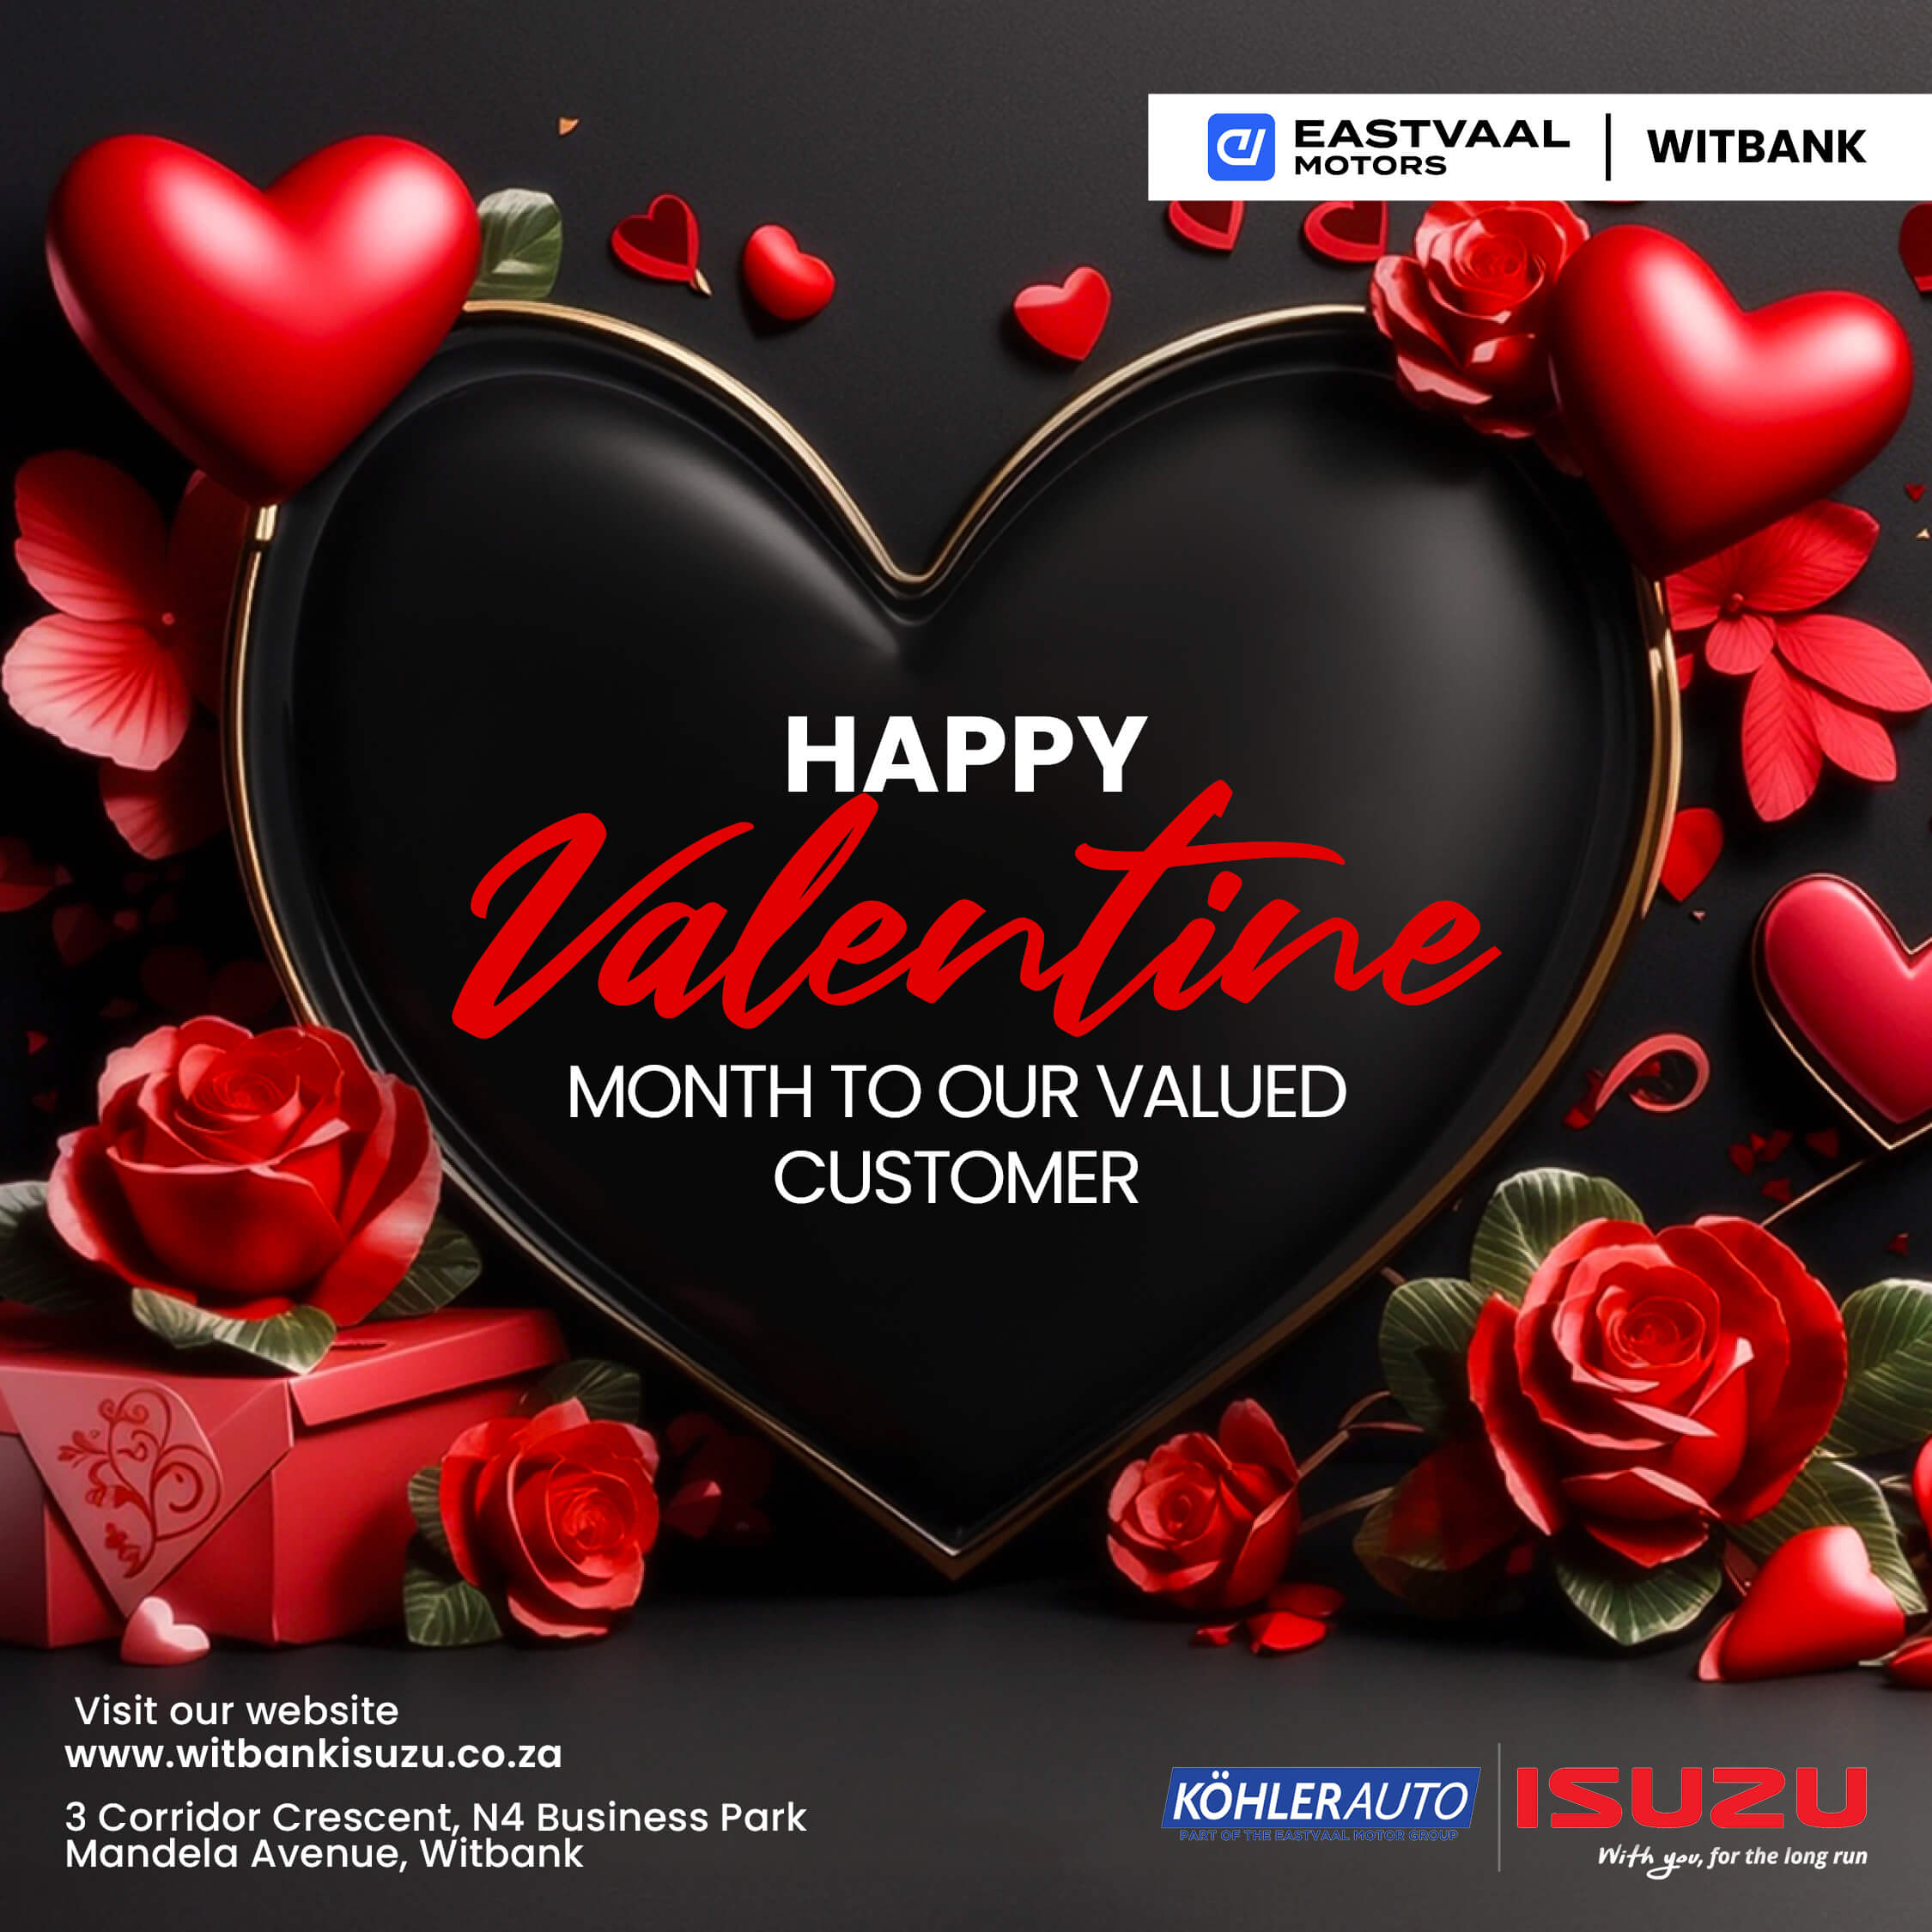 HAPPY Valentine MONTH TO OUR VALUED CUSTOMER image from Eastvaal Motors